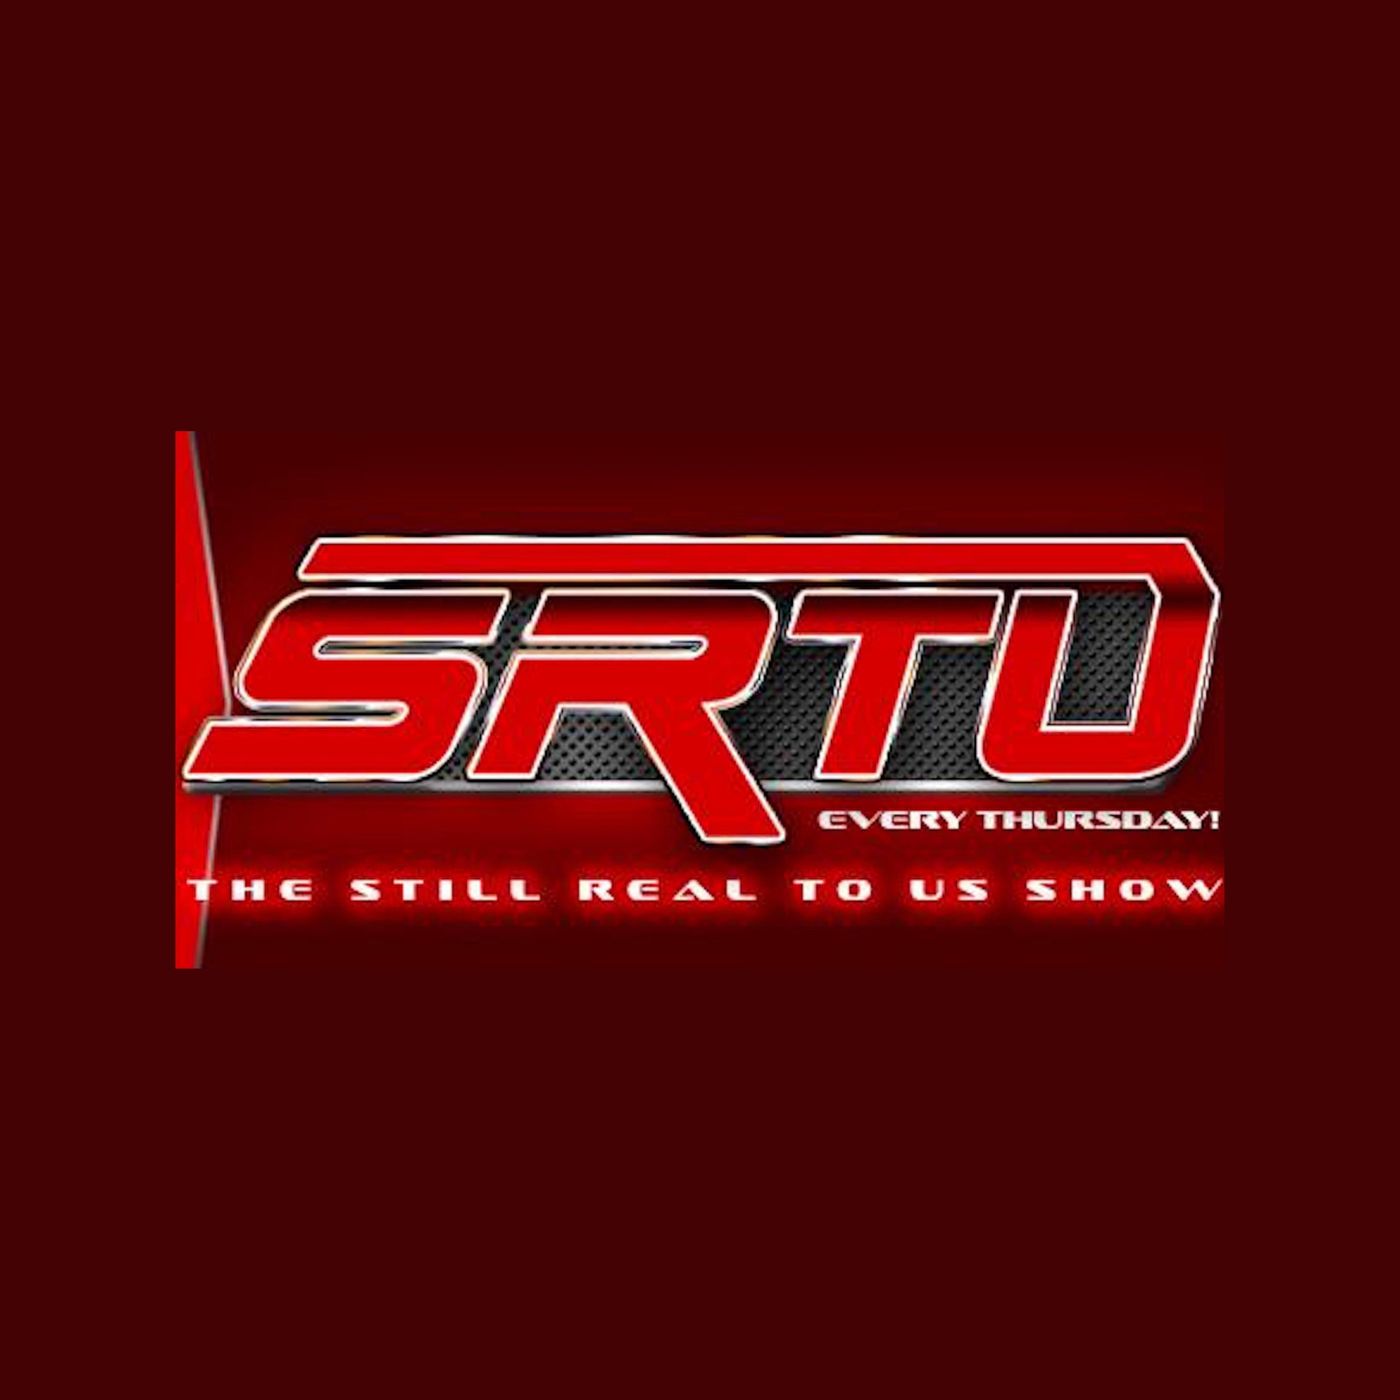 THE STILL REAL TO US SHOW – THE BOWER SHOW